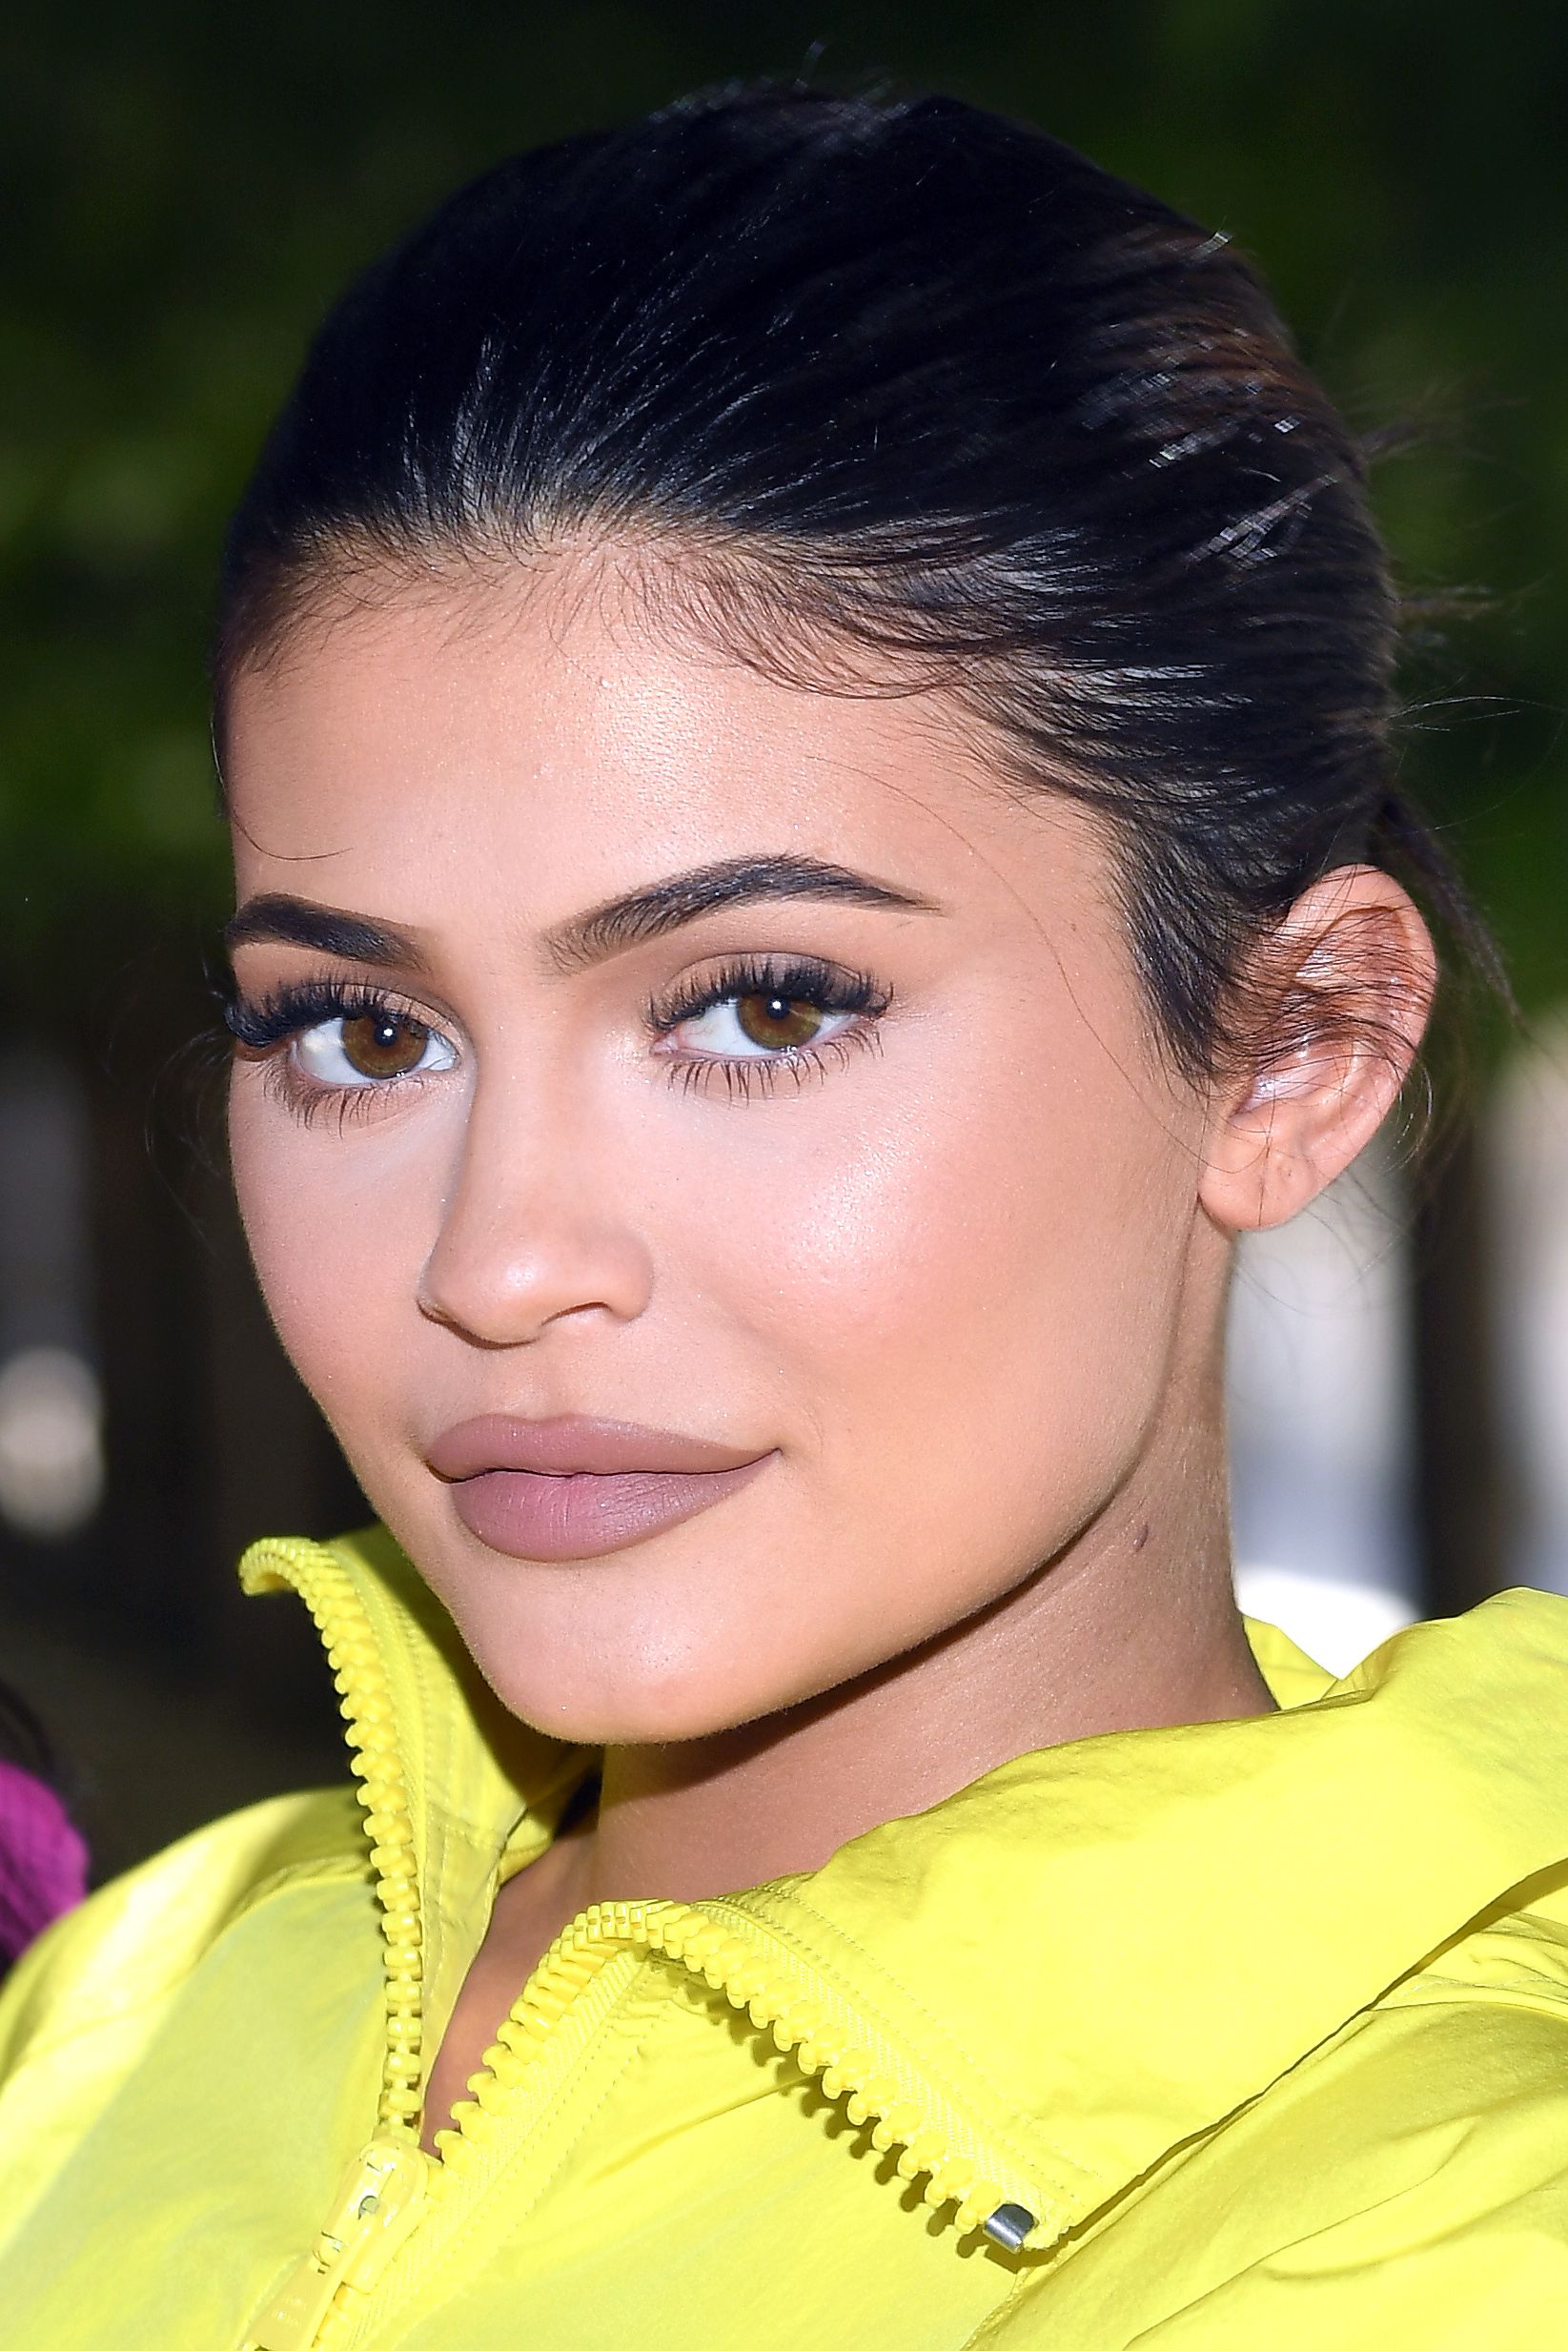 Kylie Jenner's Lemon Vibes And Makeup Look For The Louis Vuitton